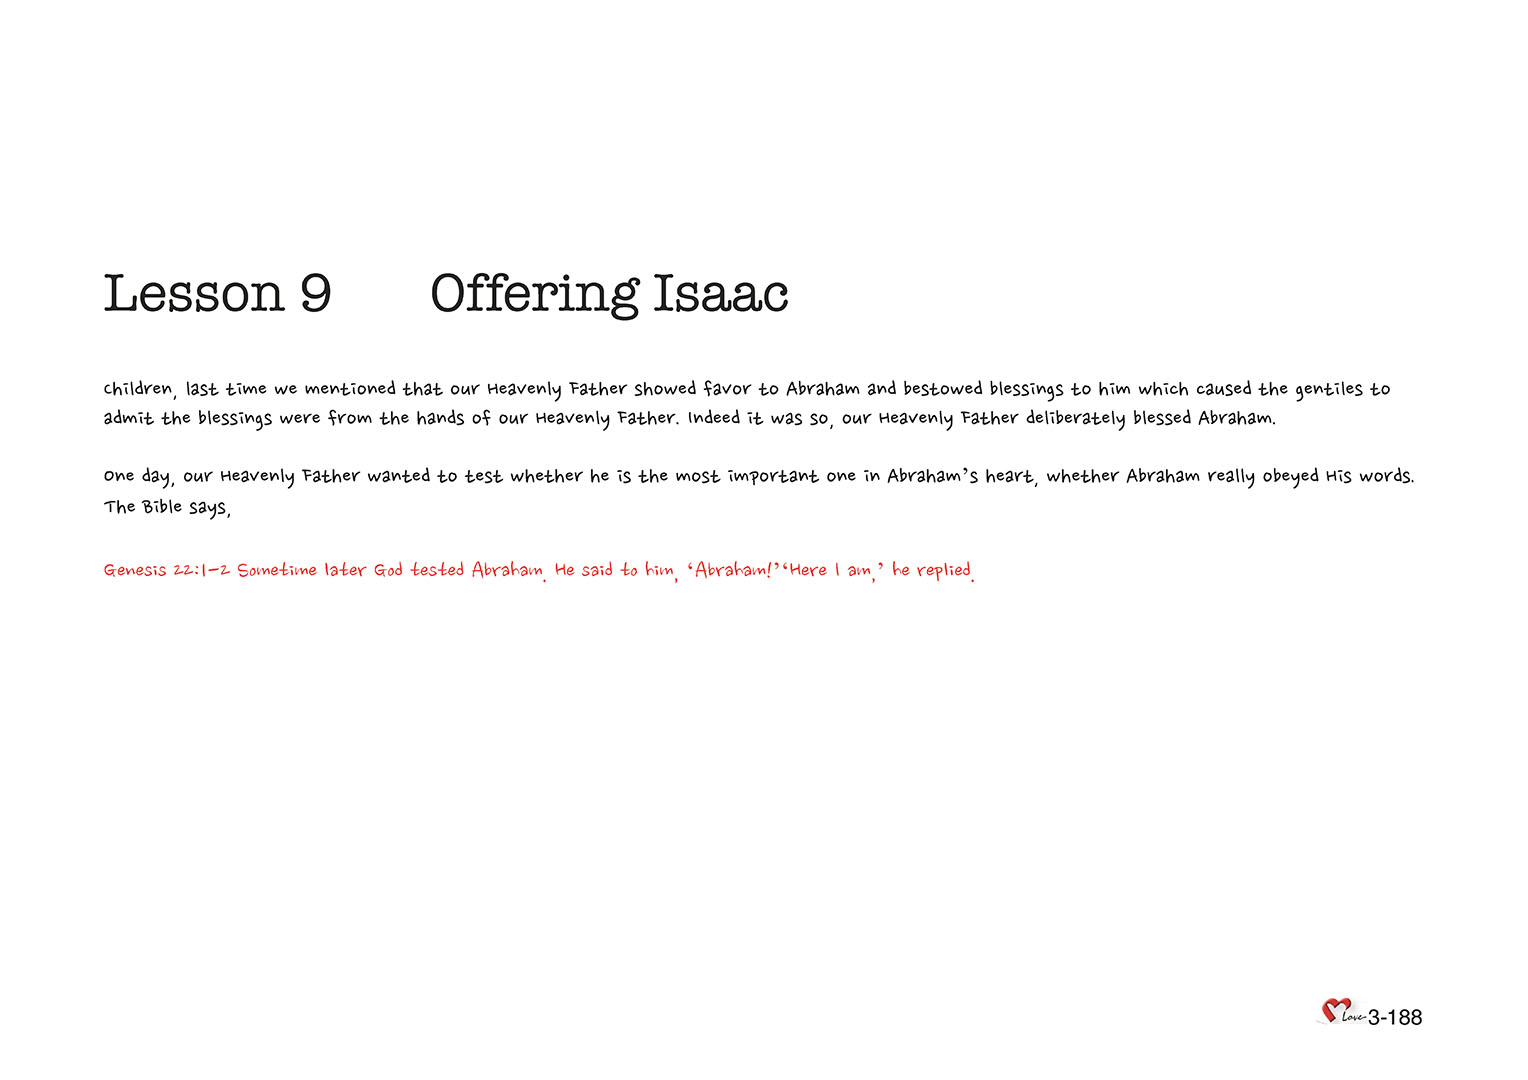 Chapter 3 - Lesson 9 - Offering Isaac